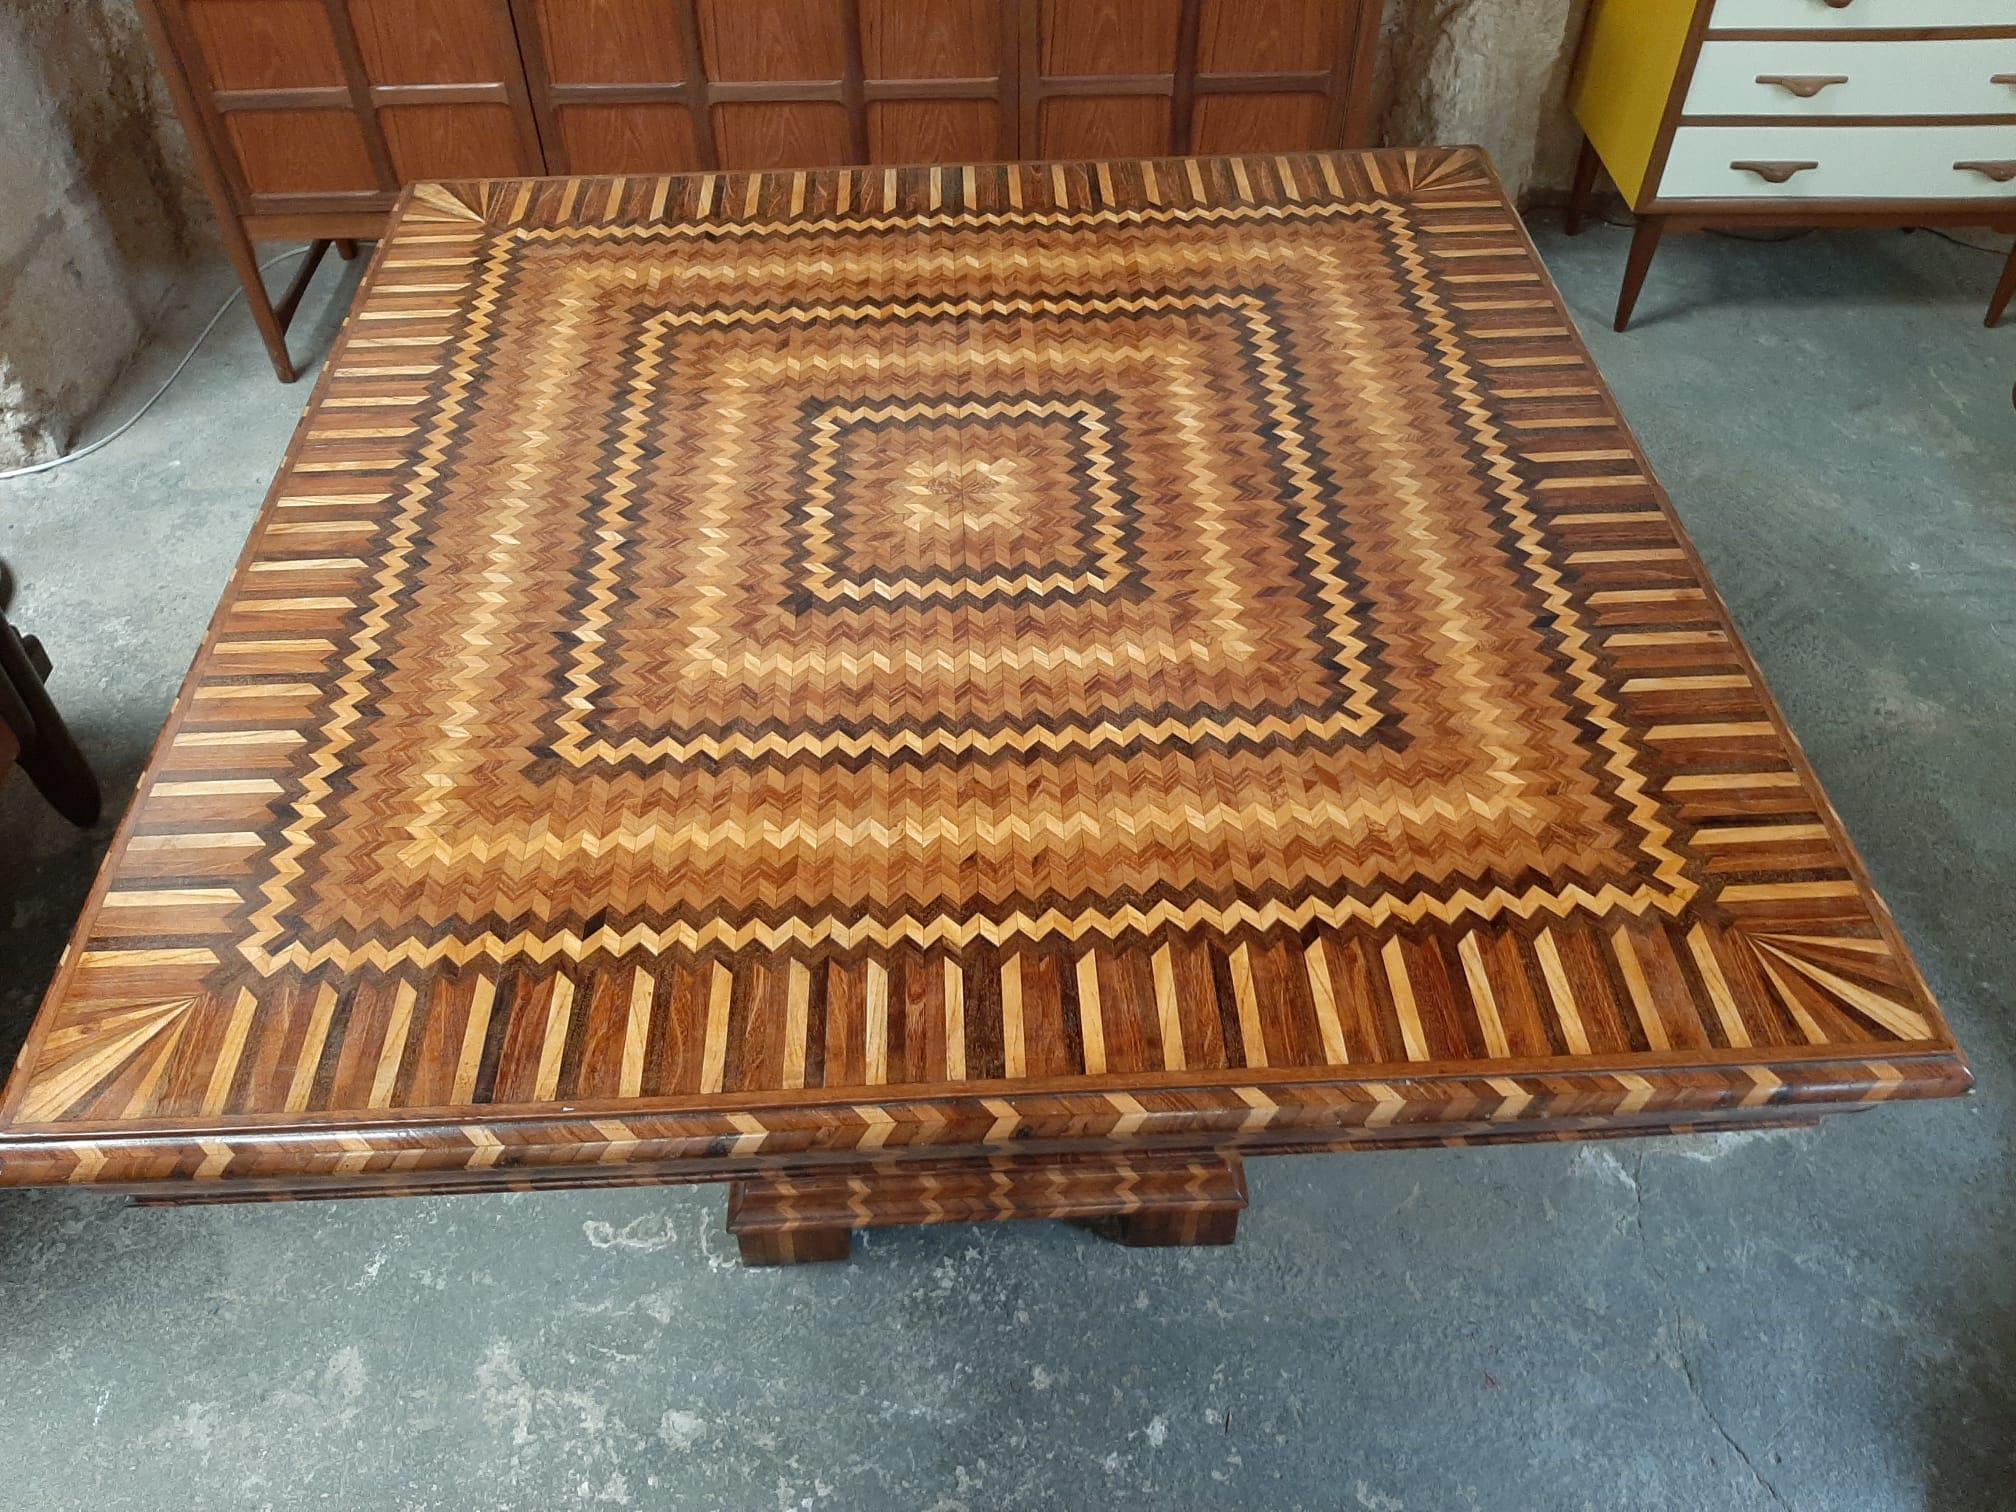 Gorgeous and one of a kind Italian table made to order in the 1940s, table in marquetry of various woods such as teak, lemongrass and walnut. 

An authentic, unrepeated, eccentric work of art!

Approx. dimensions:
Width 110cm
Length